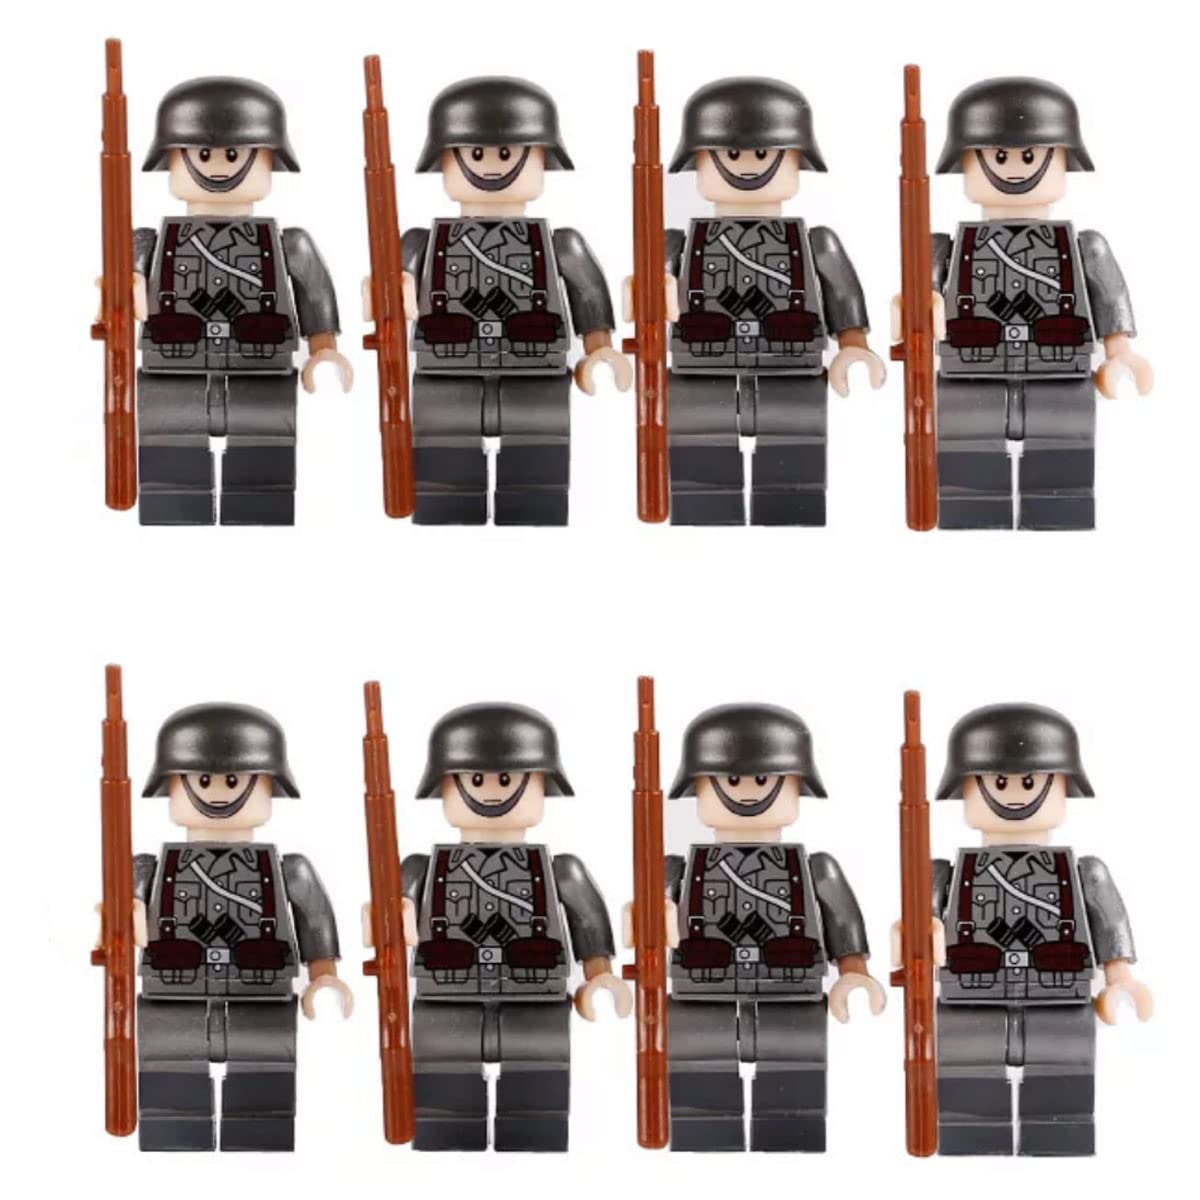 50 pcs American vs German Army Squad WW2 World War II Custom Mini Soldiers Minifigures Set Weapons Blitzkrieg Action Figures Building Blocks Weapons, Sand Bags，Artillery Toy Rifles，Army Battle Playset